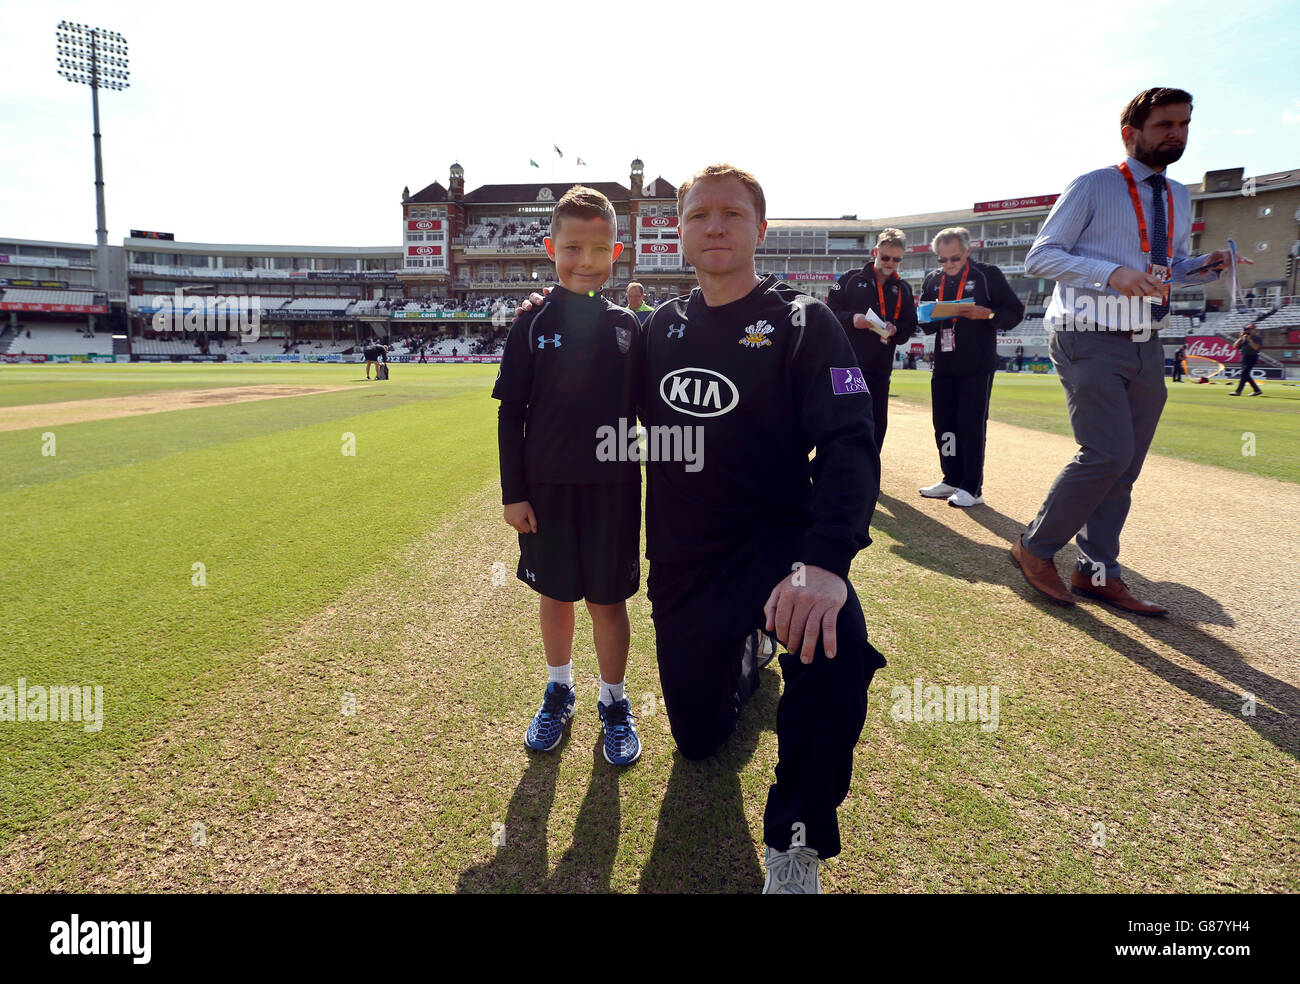 Cricket - Royal London One Day Cup - Semi Final - Surrey v Nottinghamshire - The Kia Oval. The Surrey match day mascot with Gareth Batty Stock Photo